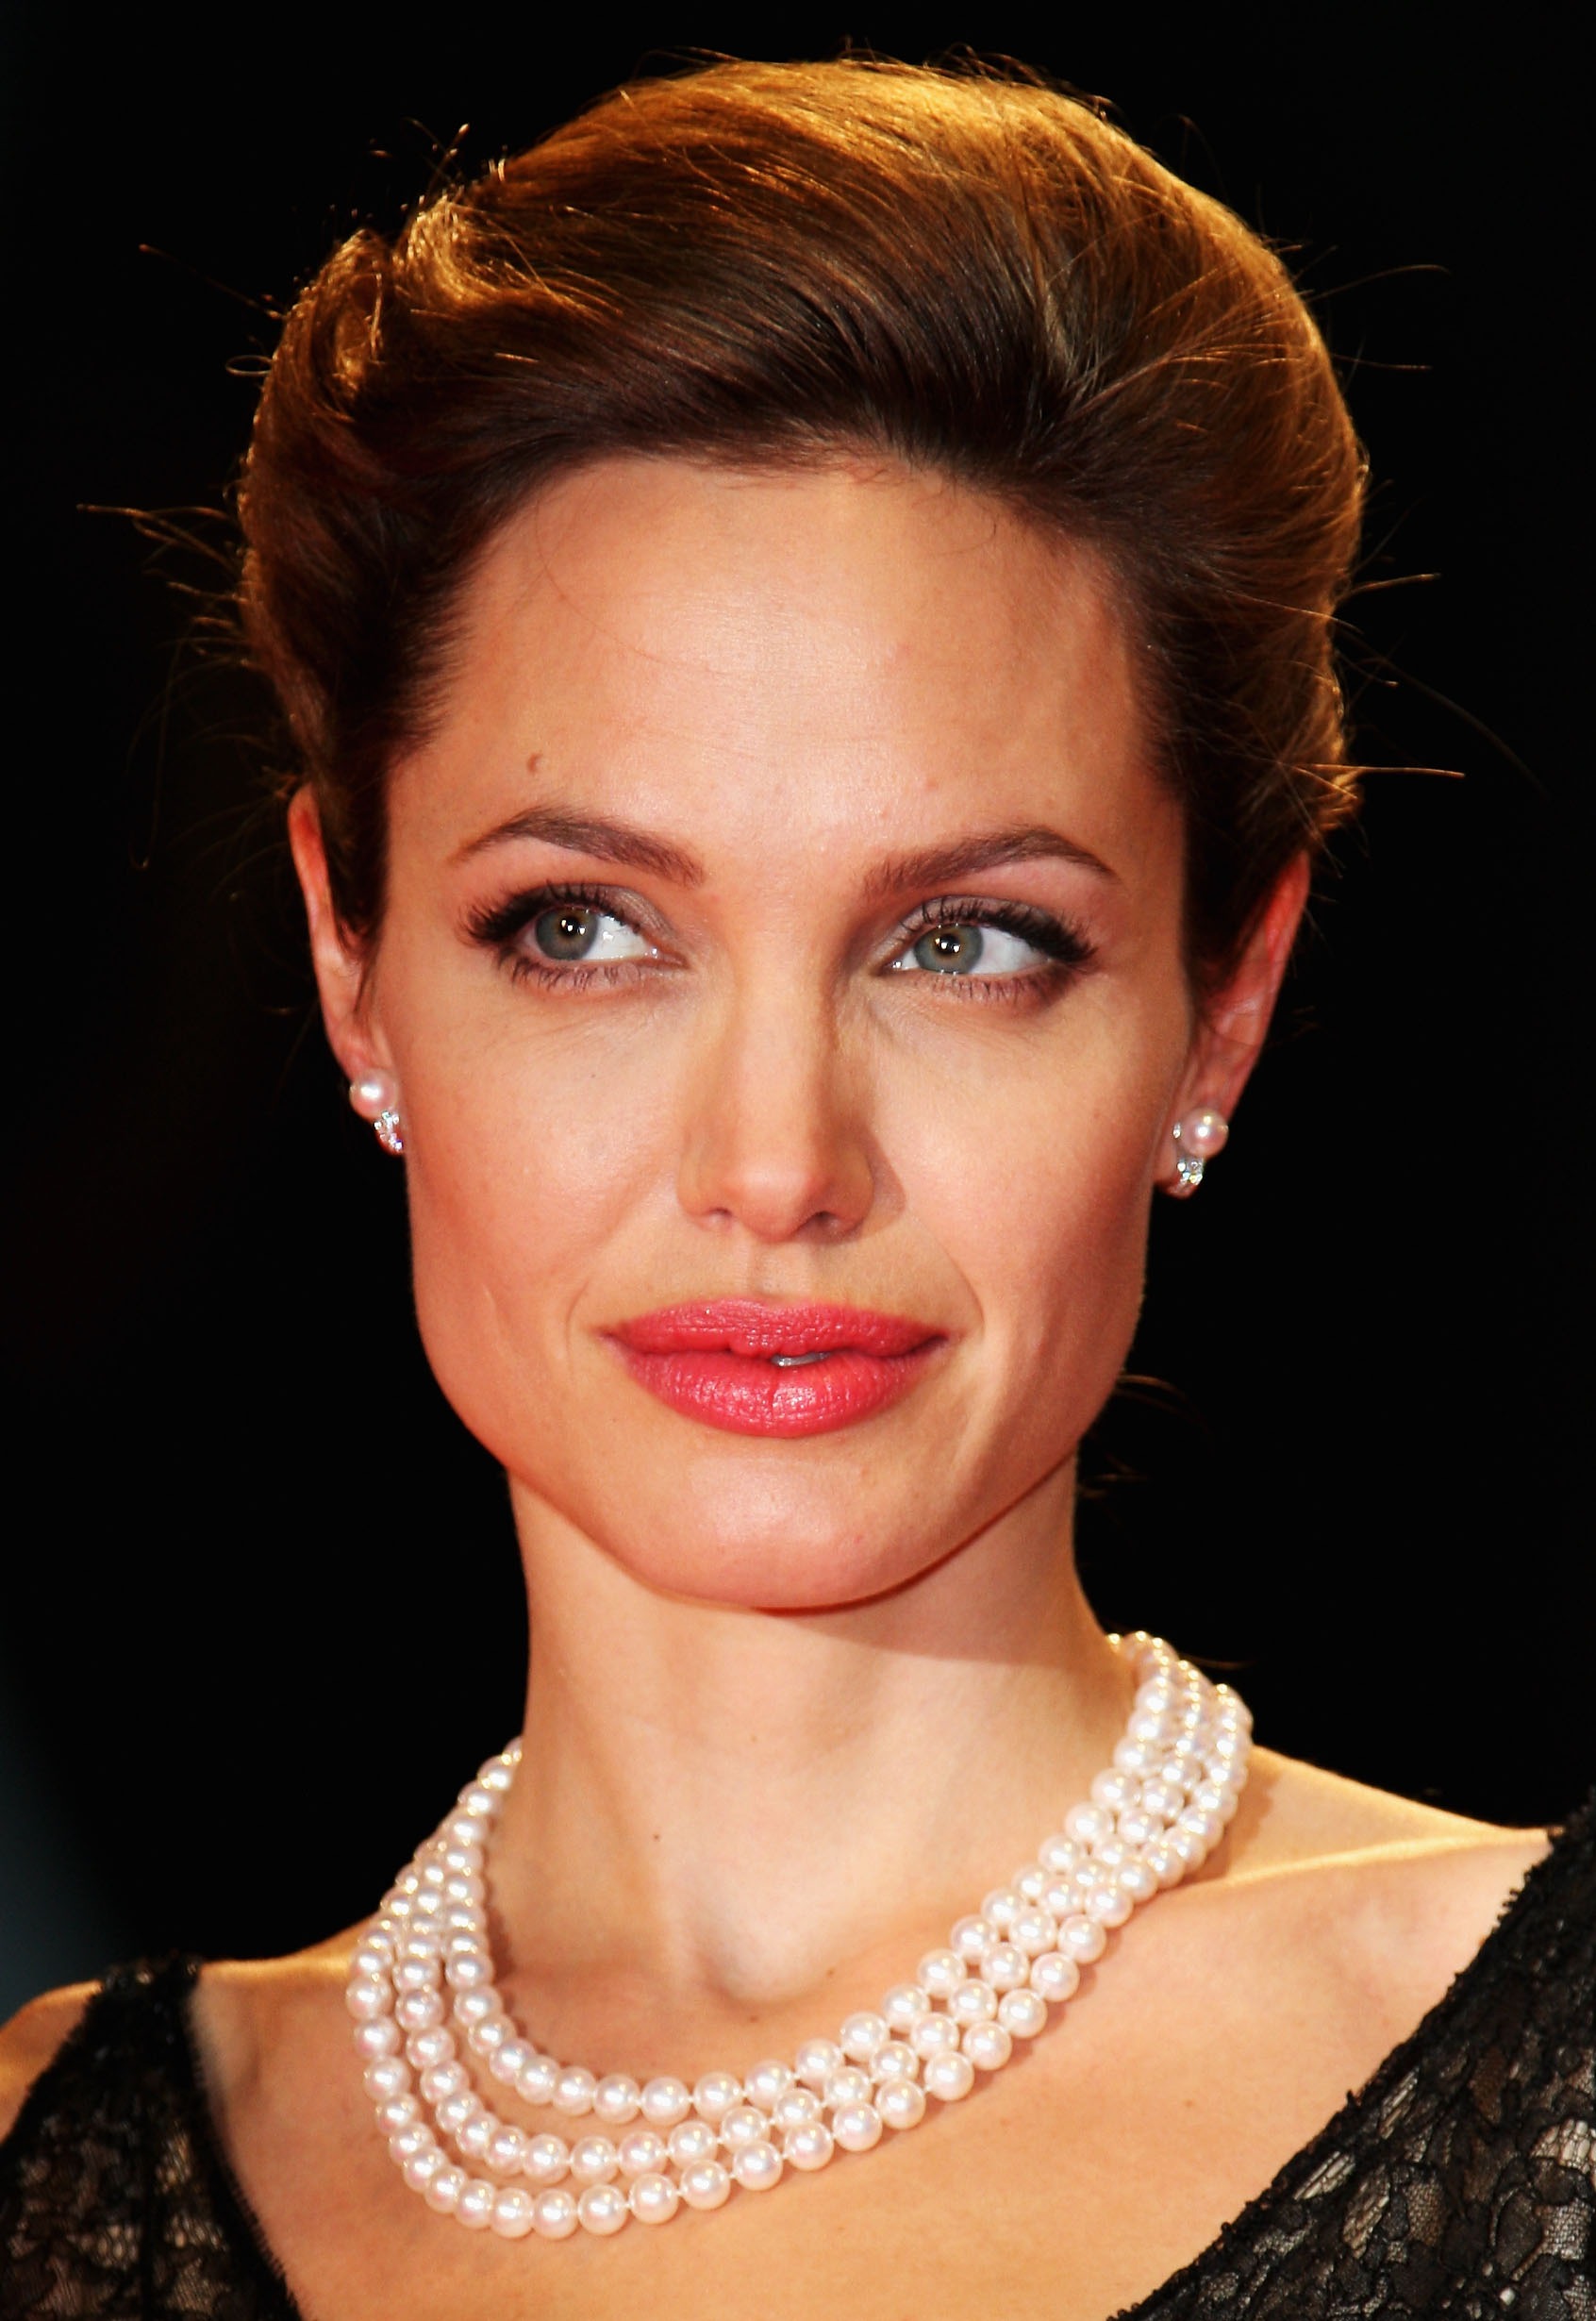 Angelina Jolie attends "The Assassination Of Jesse James By The Coward Robert Ford" premiere during day 5 of the 64th Venice Film Festival in Venice, Italy on September 2, 2007. | Source: Getty Images